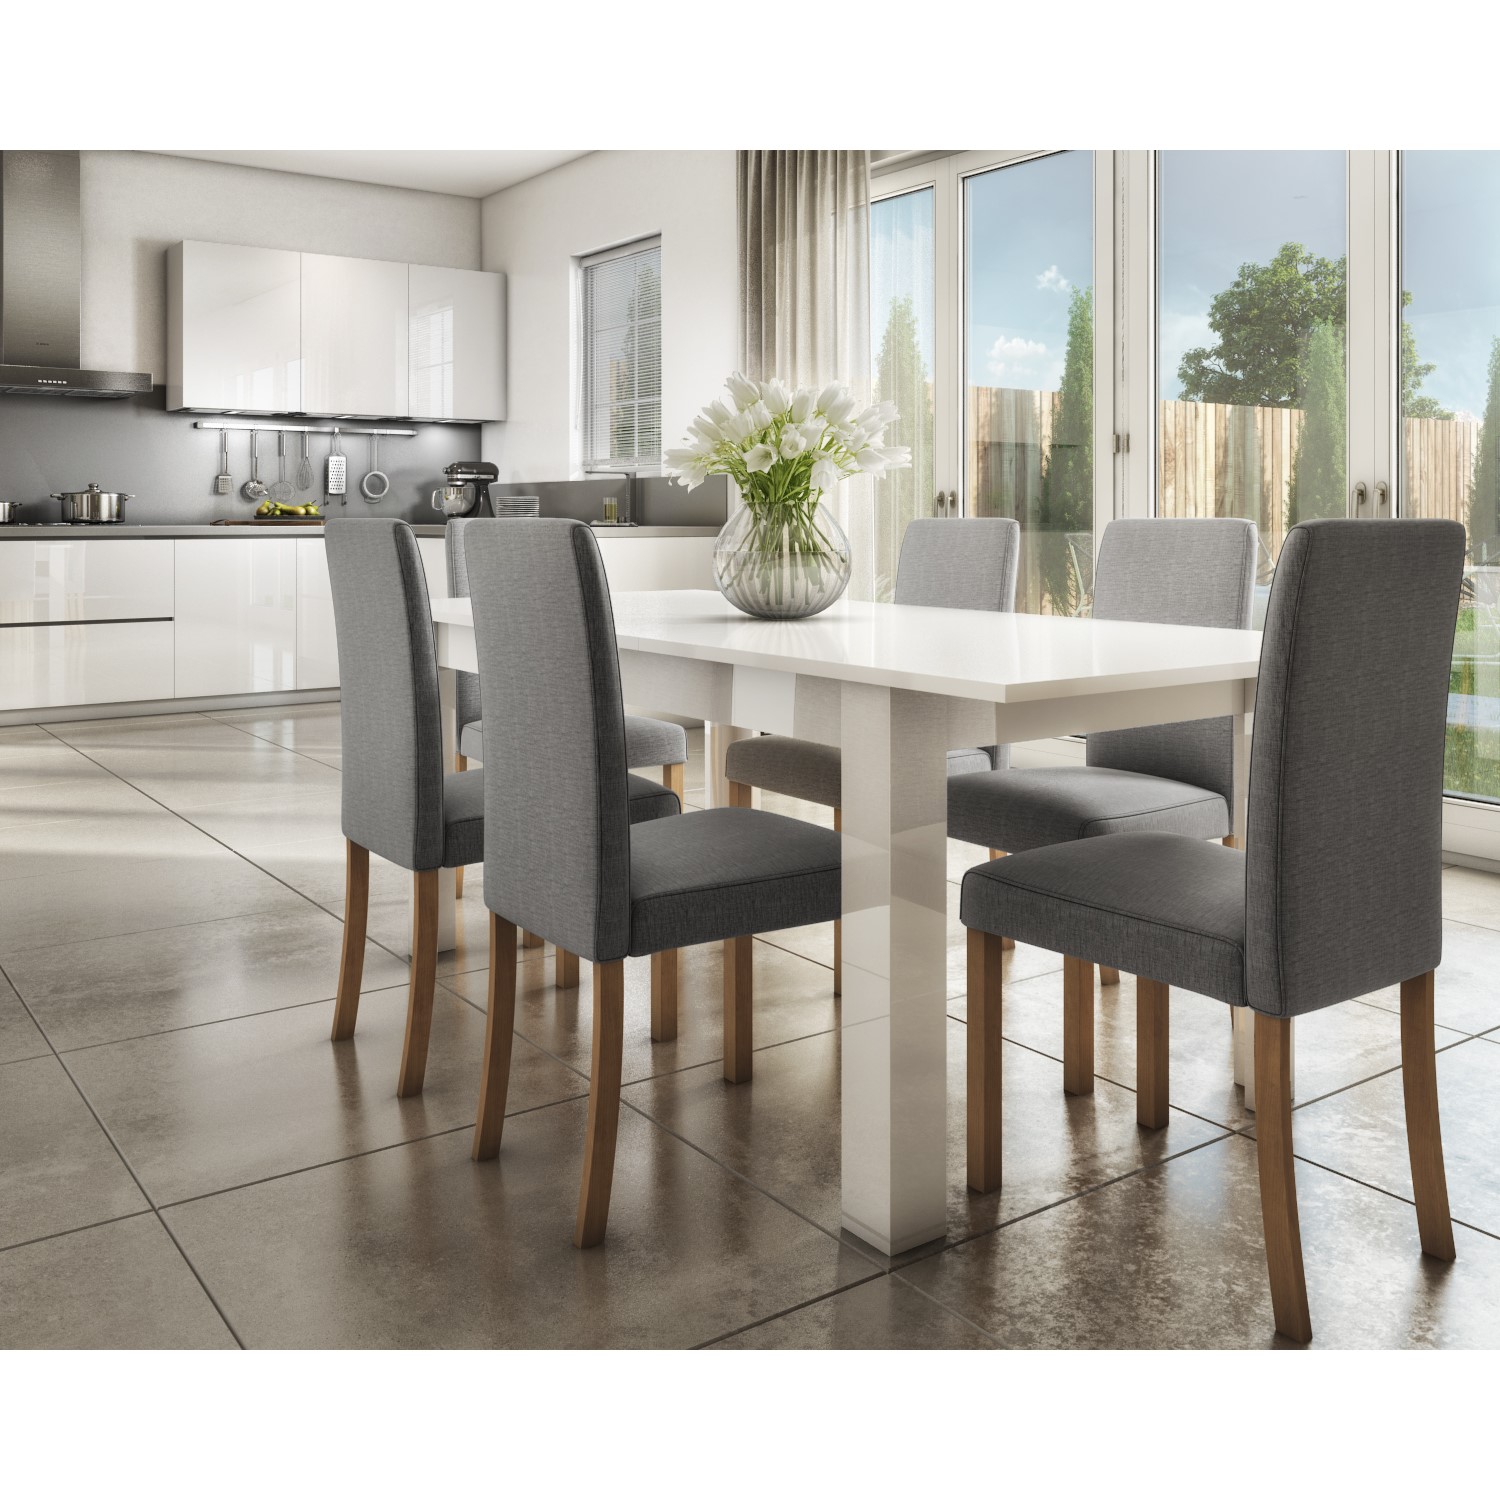 Extendable Dining Table In White High Gloss With 6 Grey Chairs Vivienne New Haven Furniture123